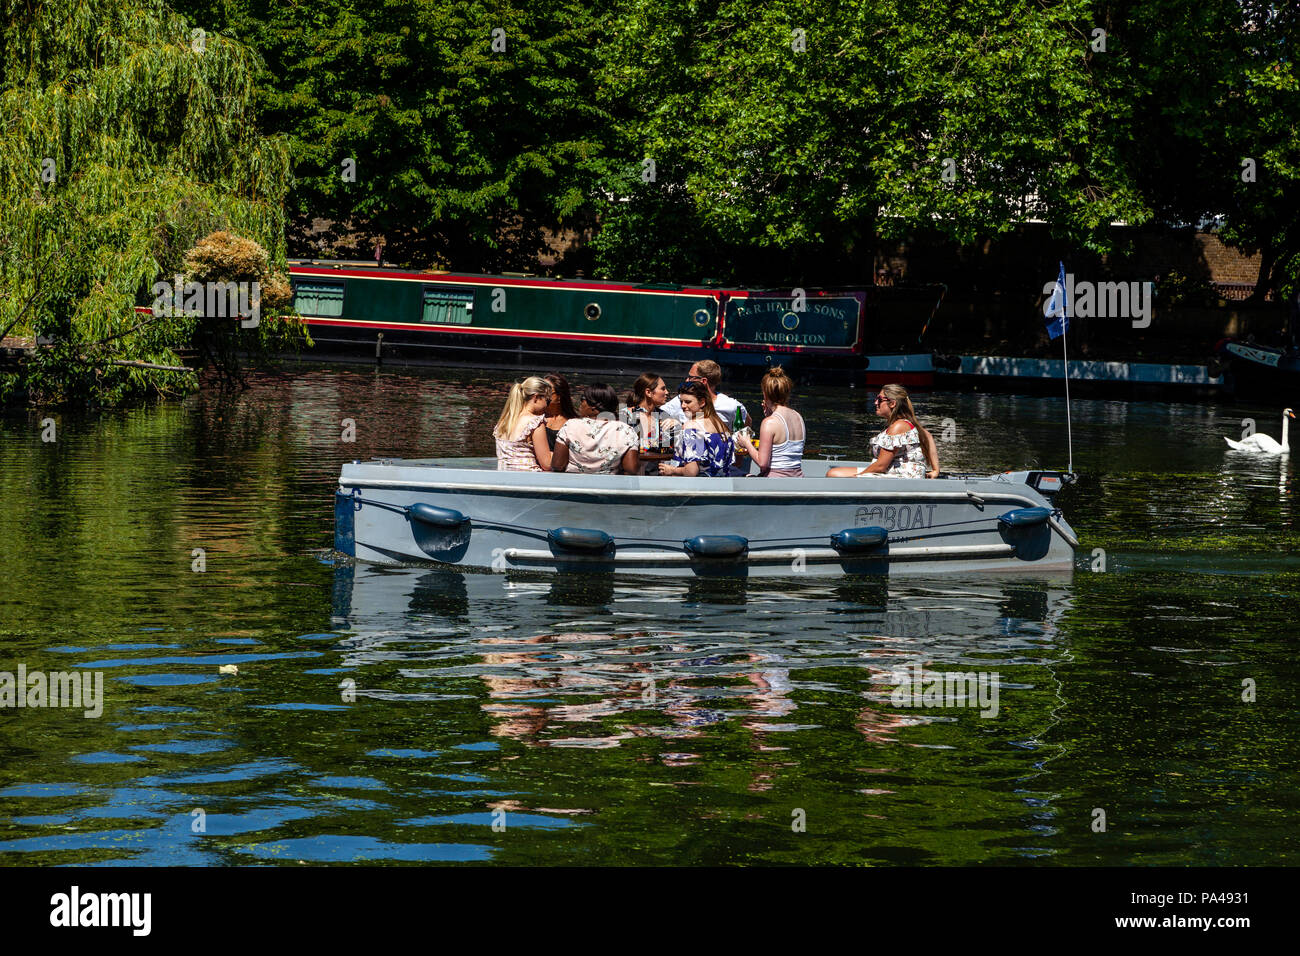 A GoBoat On Regent's Canal, In Little Venice, London, England Stock Photo -  Alamy